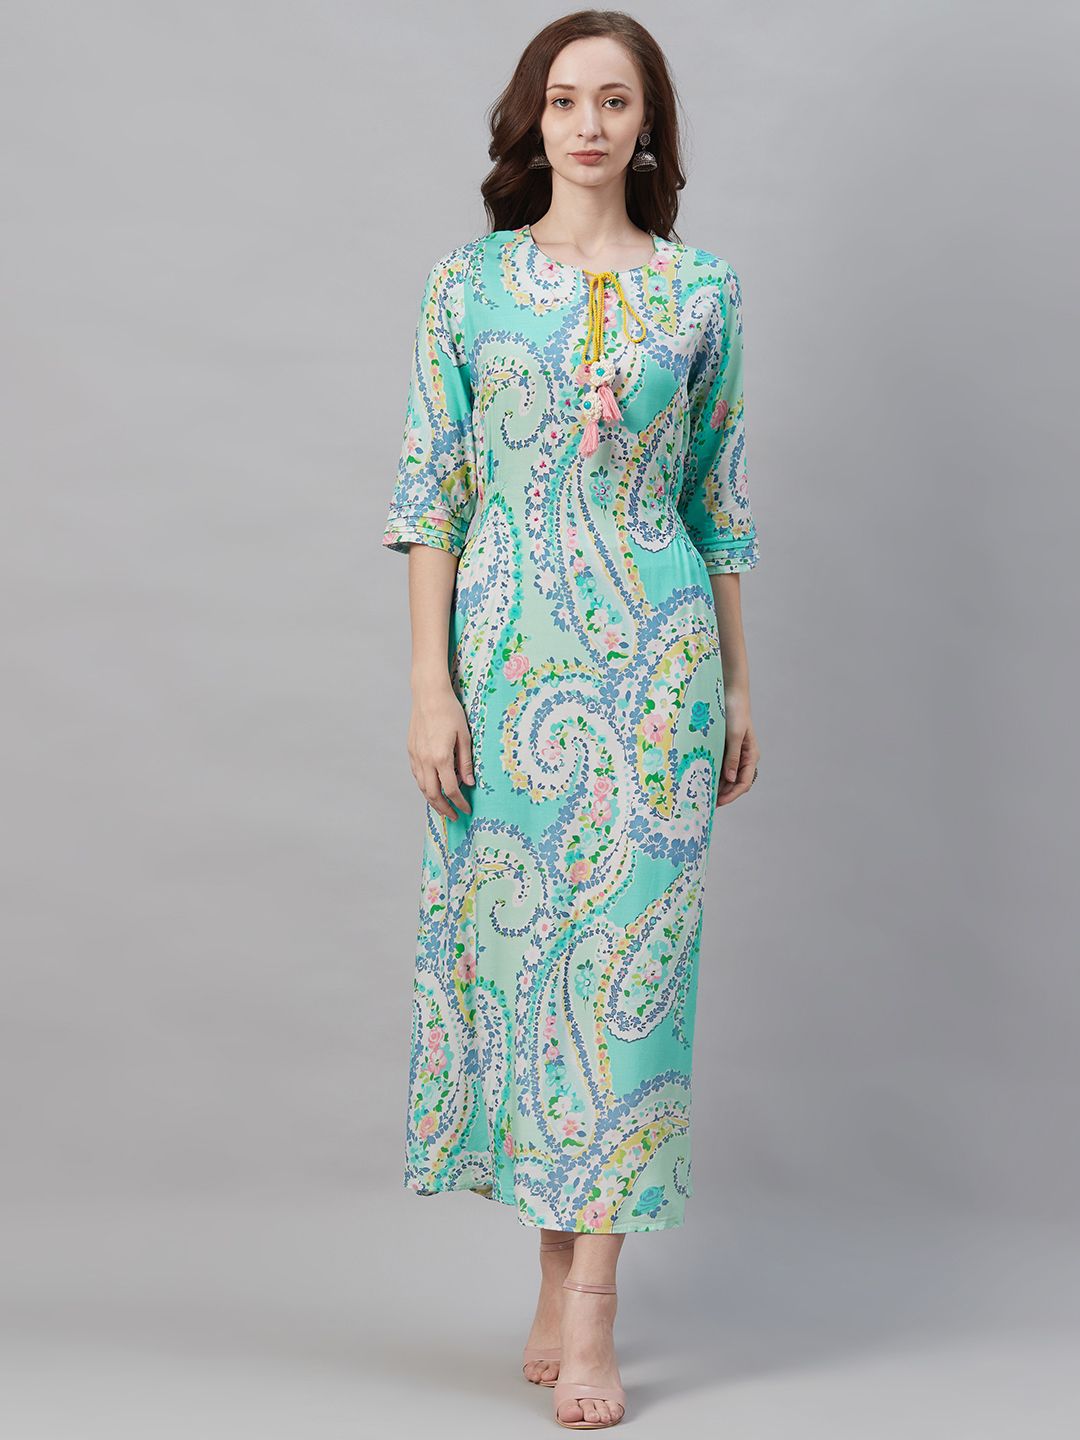 Round Neck Floral Dress Front